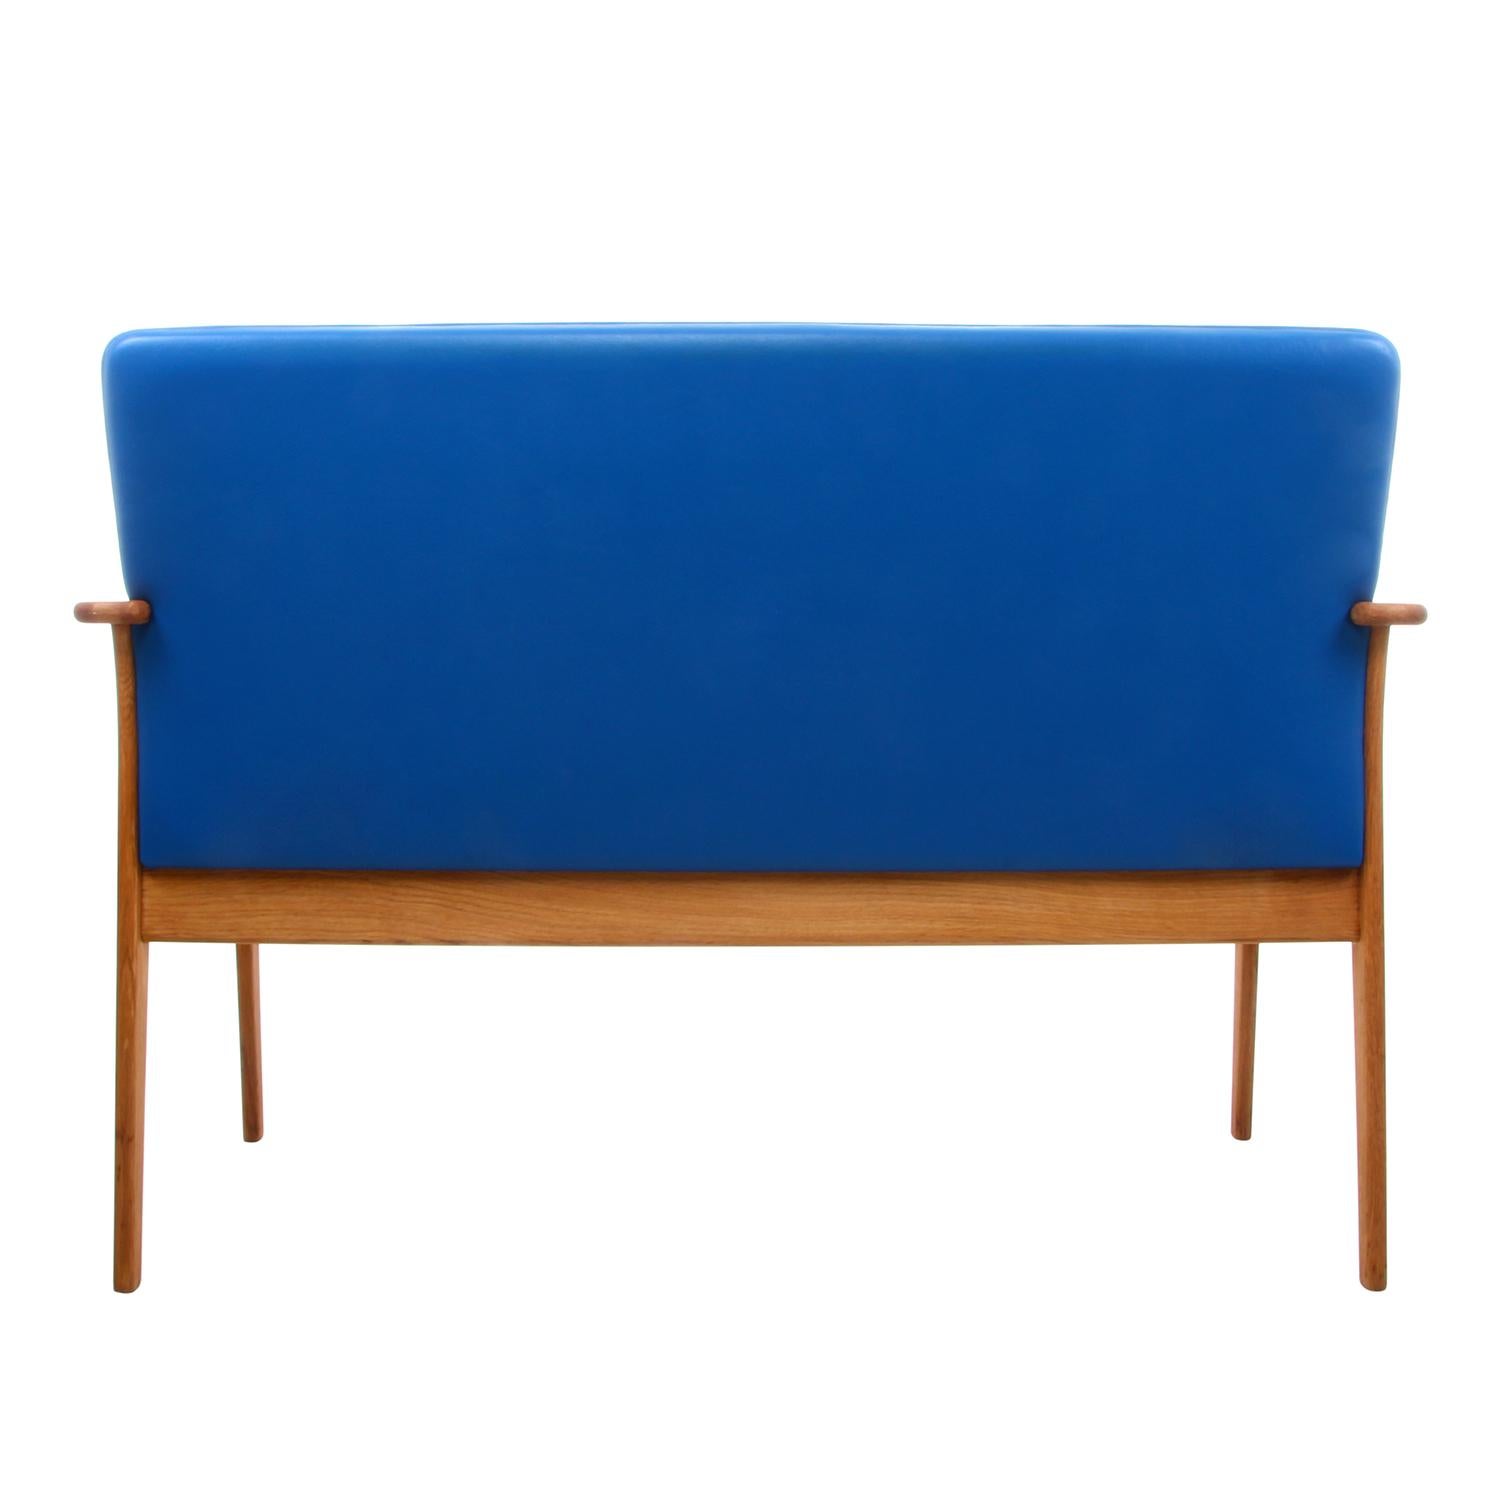 Two-Seat Sofa by Erik Buch 1970s Oil-Treated Oak Couch with Clear Blue Upholster (Dänisch)